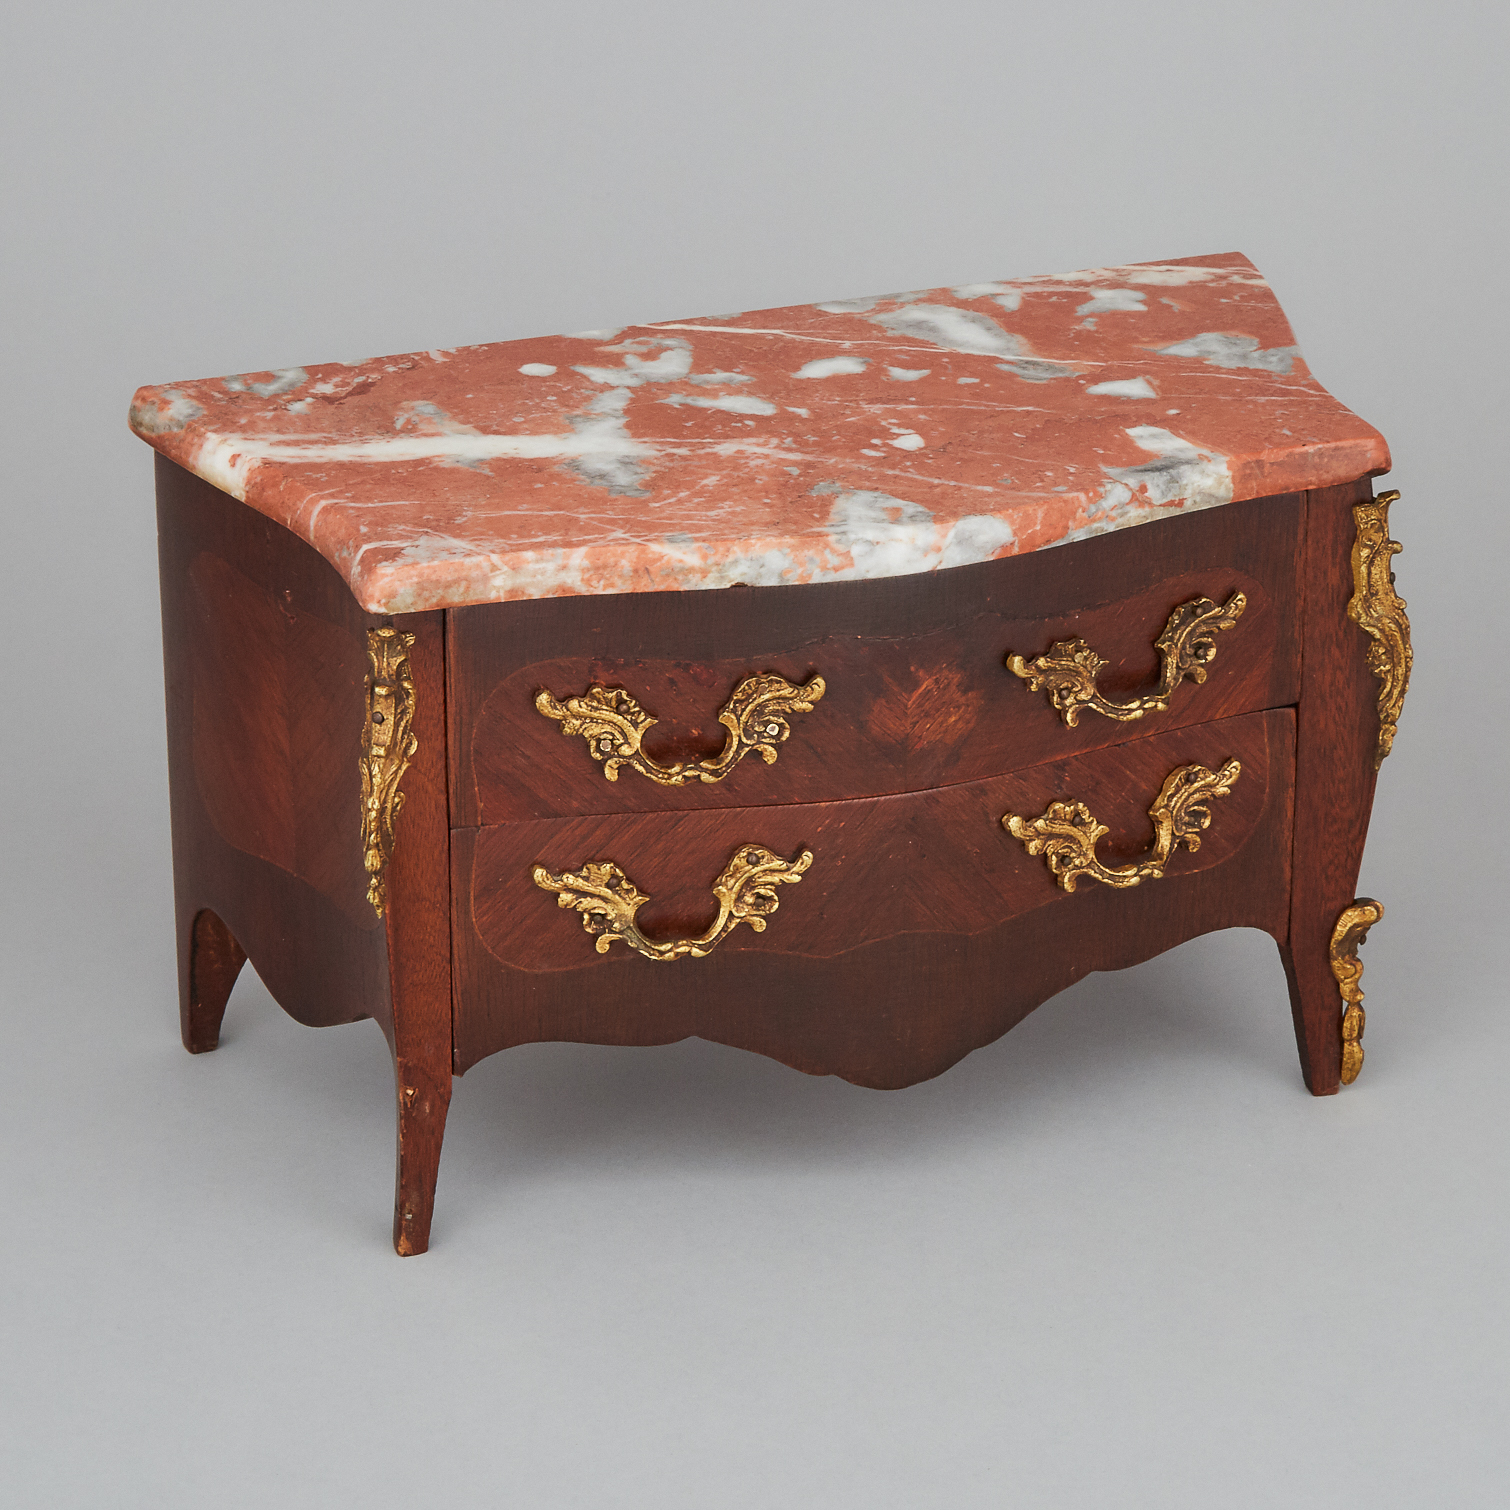 Miniature French Ormolu Mounted Kingwood Parquetry Bombé Chest, mid 20th century